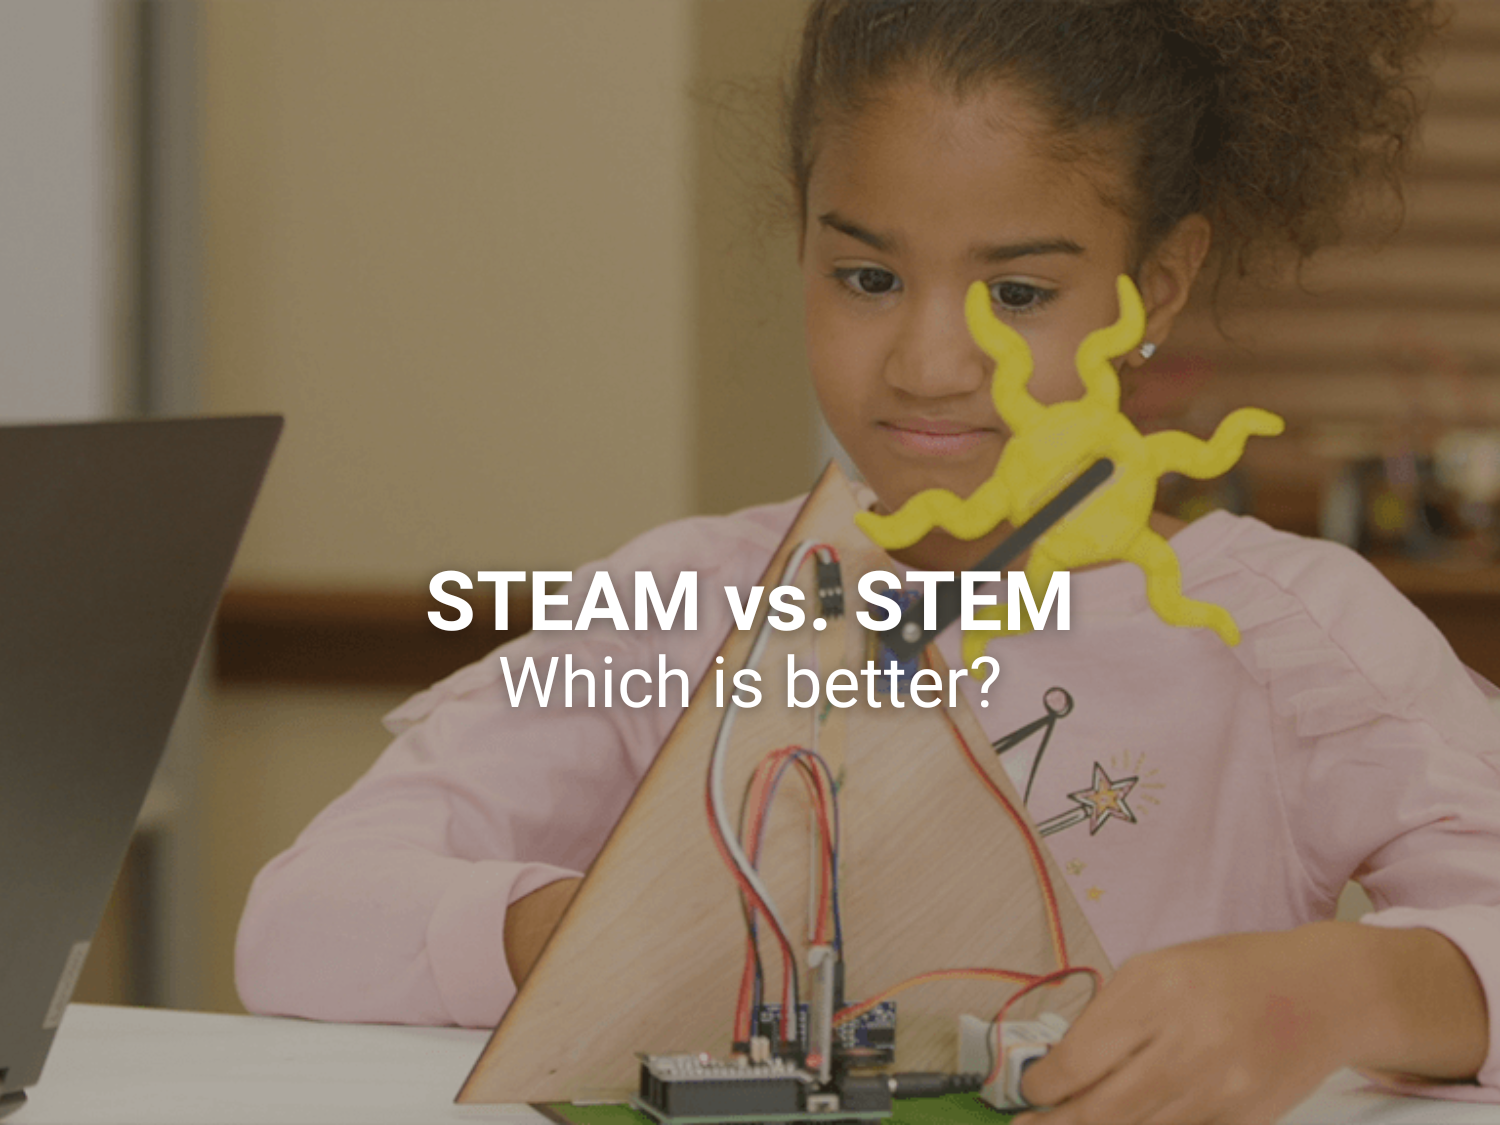 STEM Vs. STEAM: Which is better?